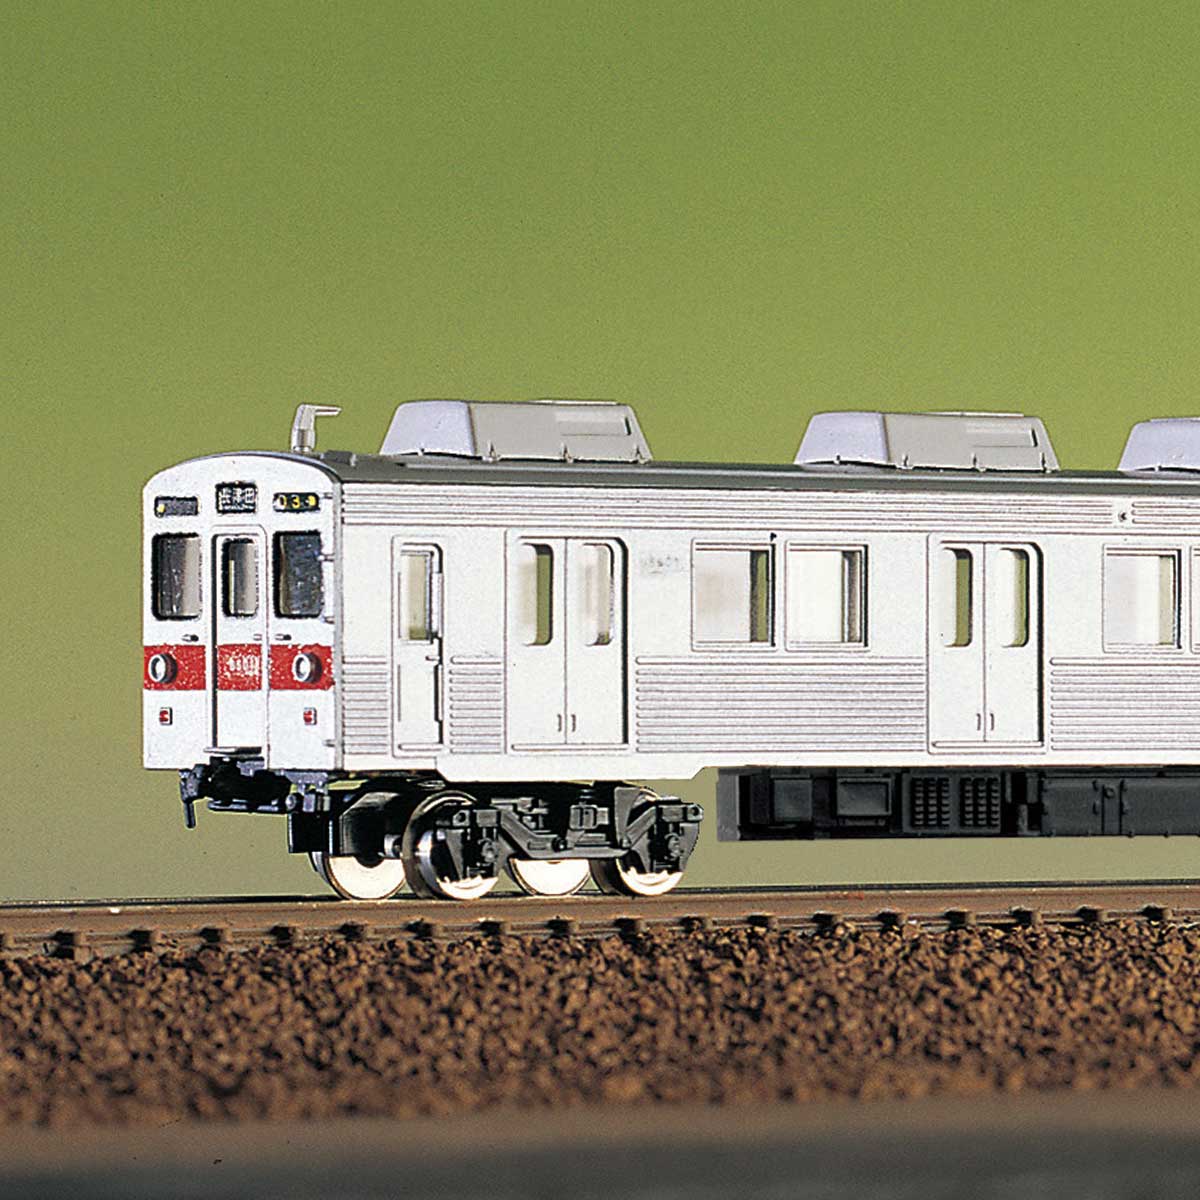 418A＞東急電鉄8500系 5両編成セット｜エコノミーキット｜Nゲージ鉄道 